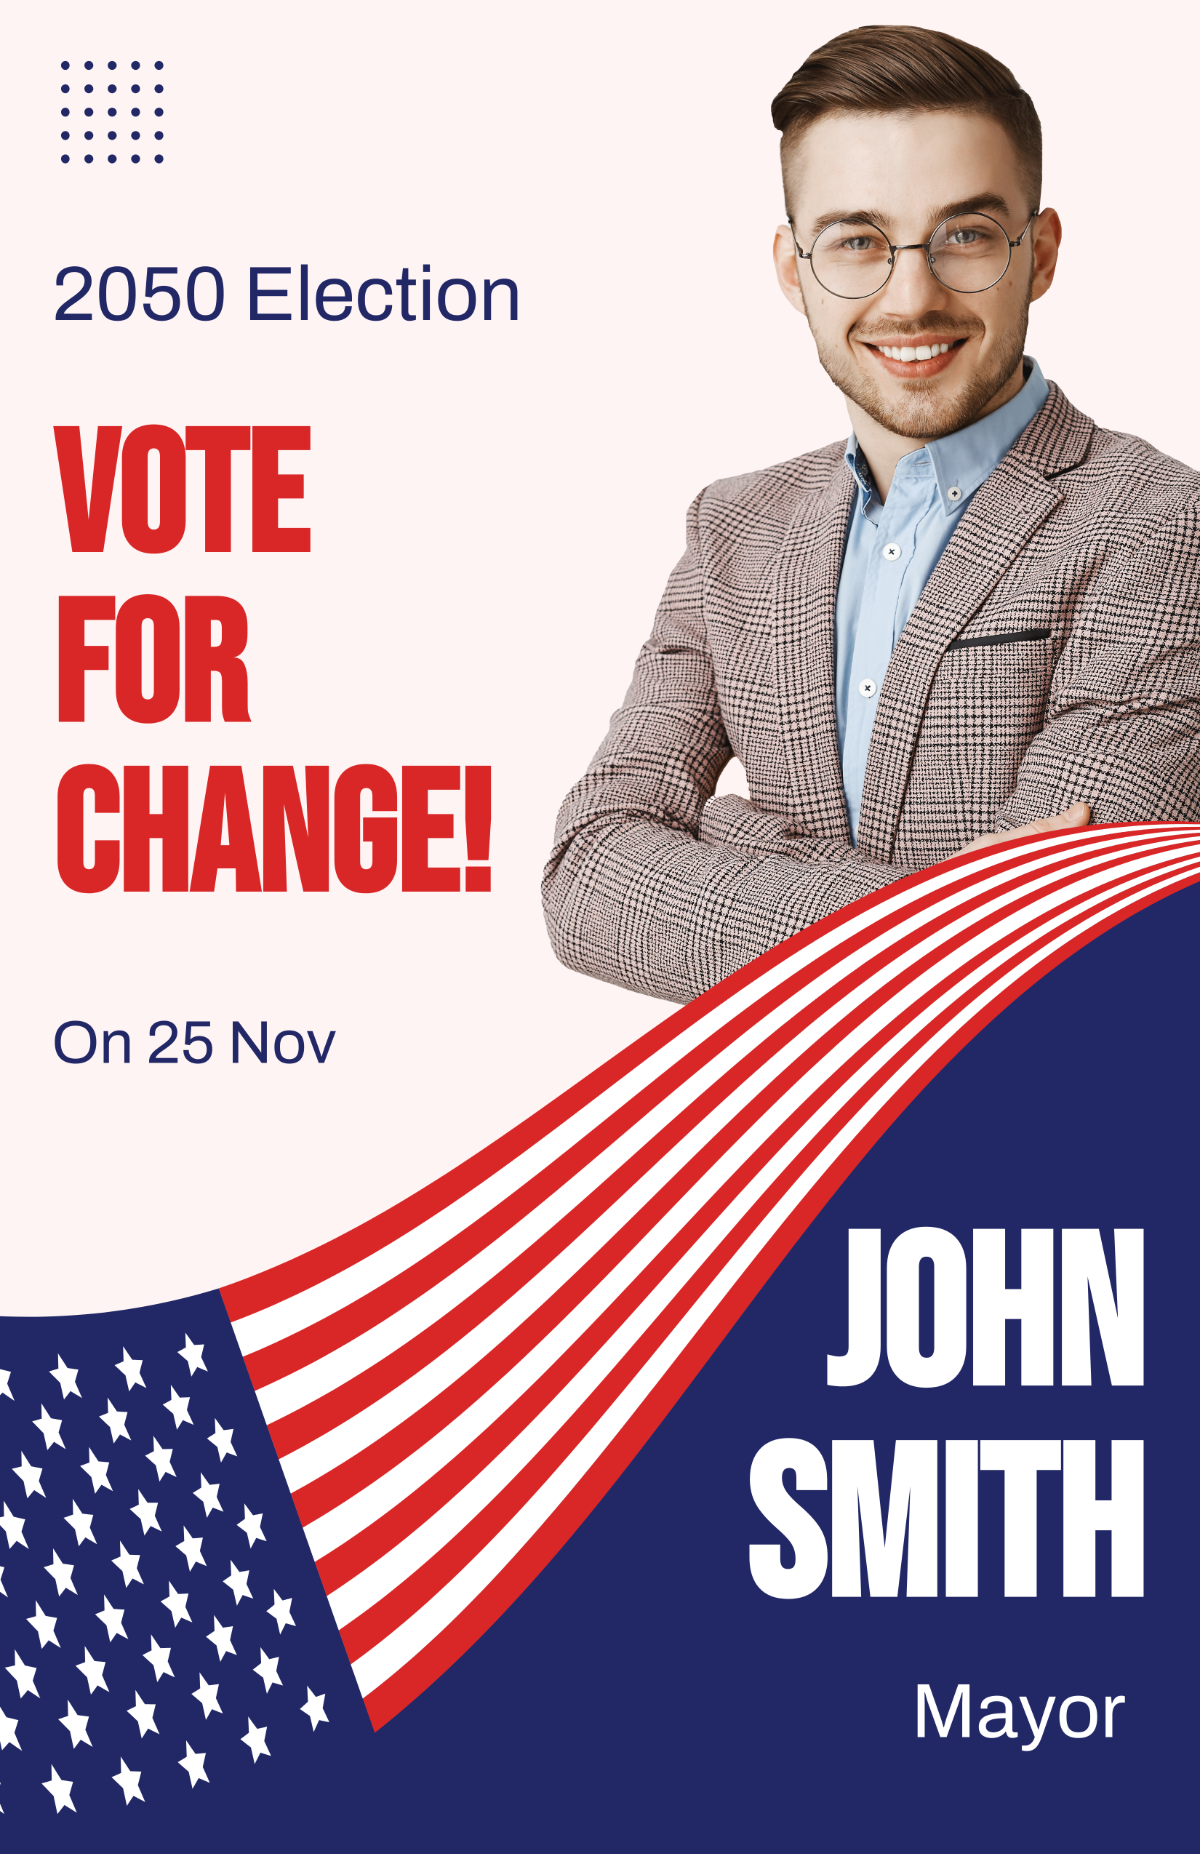 Political Campaign Poster Template